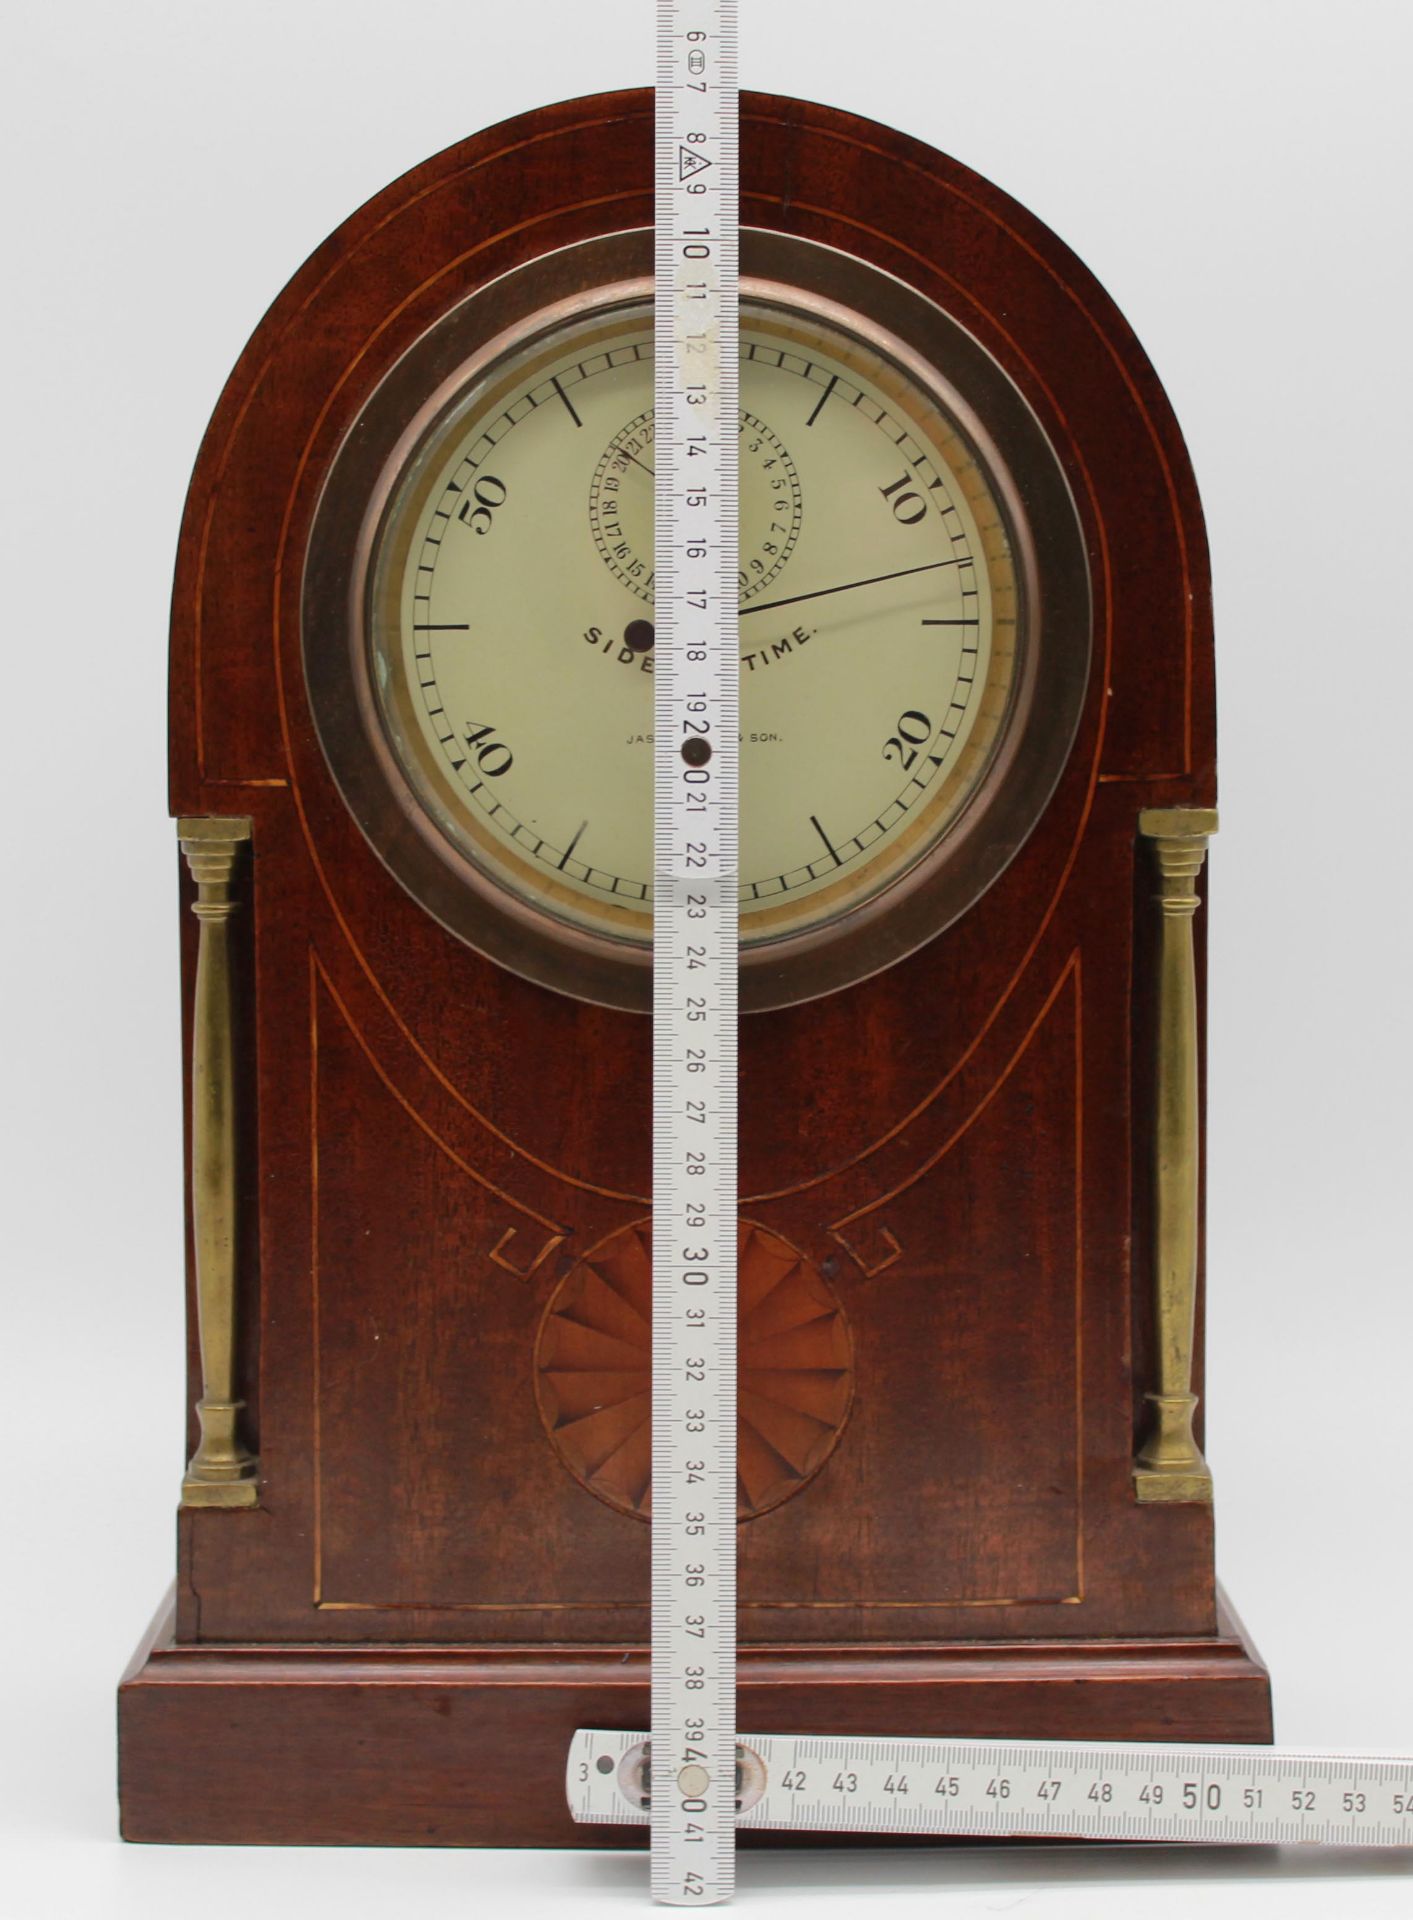 Mantel clock. Sideral time. Jas Ritchie and Son, Paris. Original double key. - Image 9 of 17